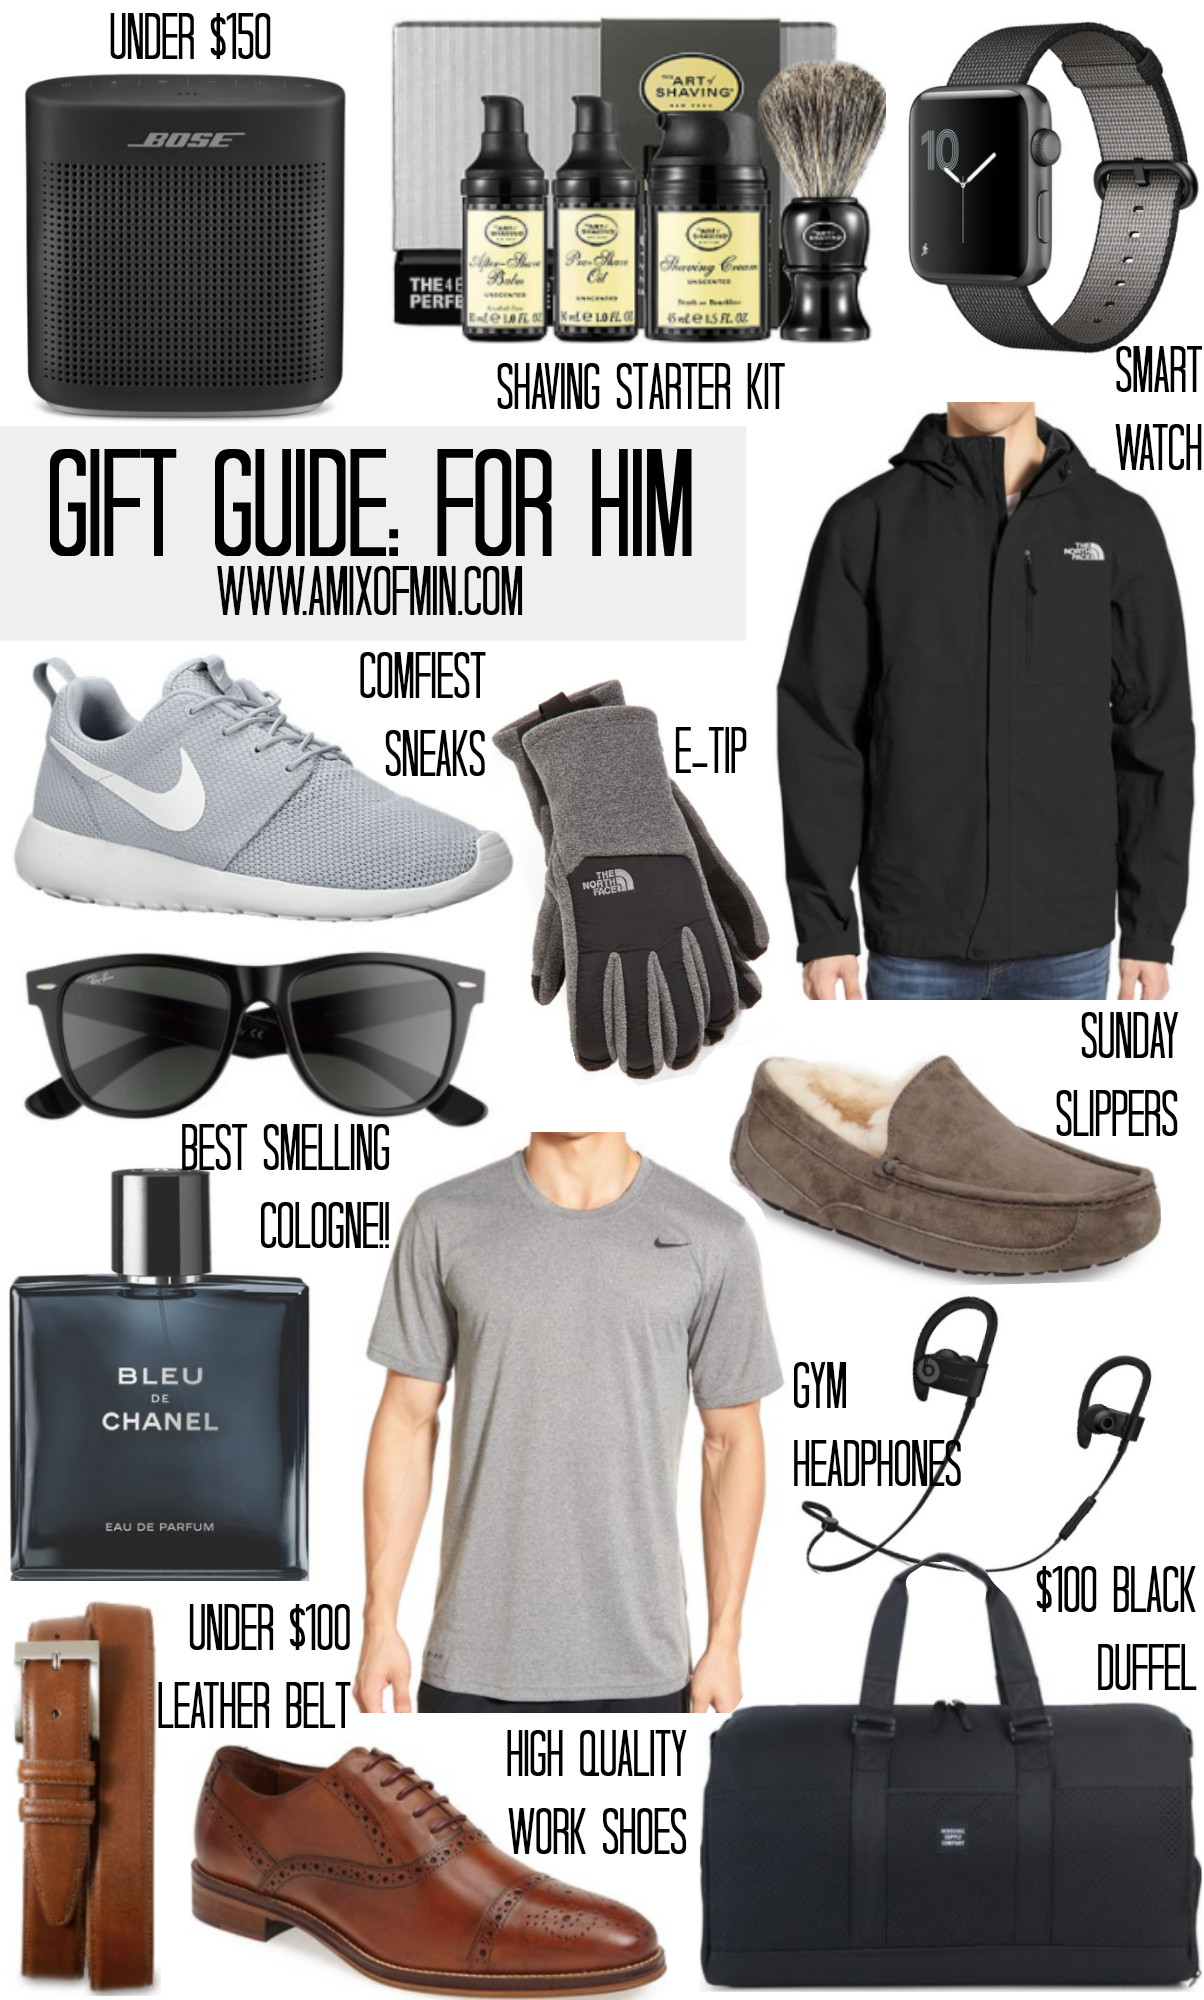 Good Christmas Gift Ideas For Boyfriend
 Ultimate Holiday Christmas Gift Guide for Him